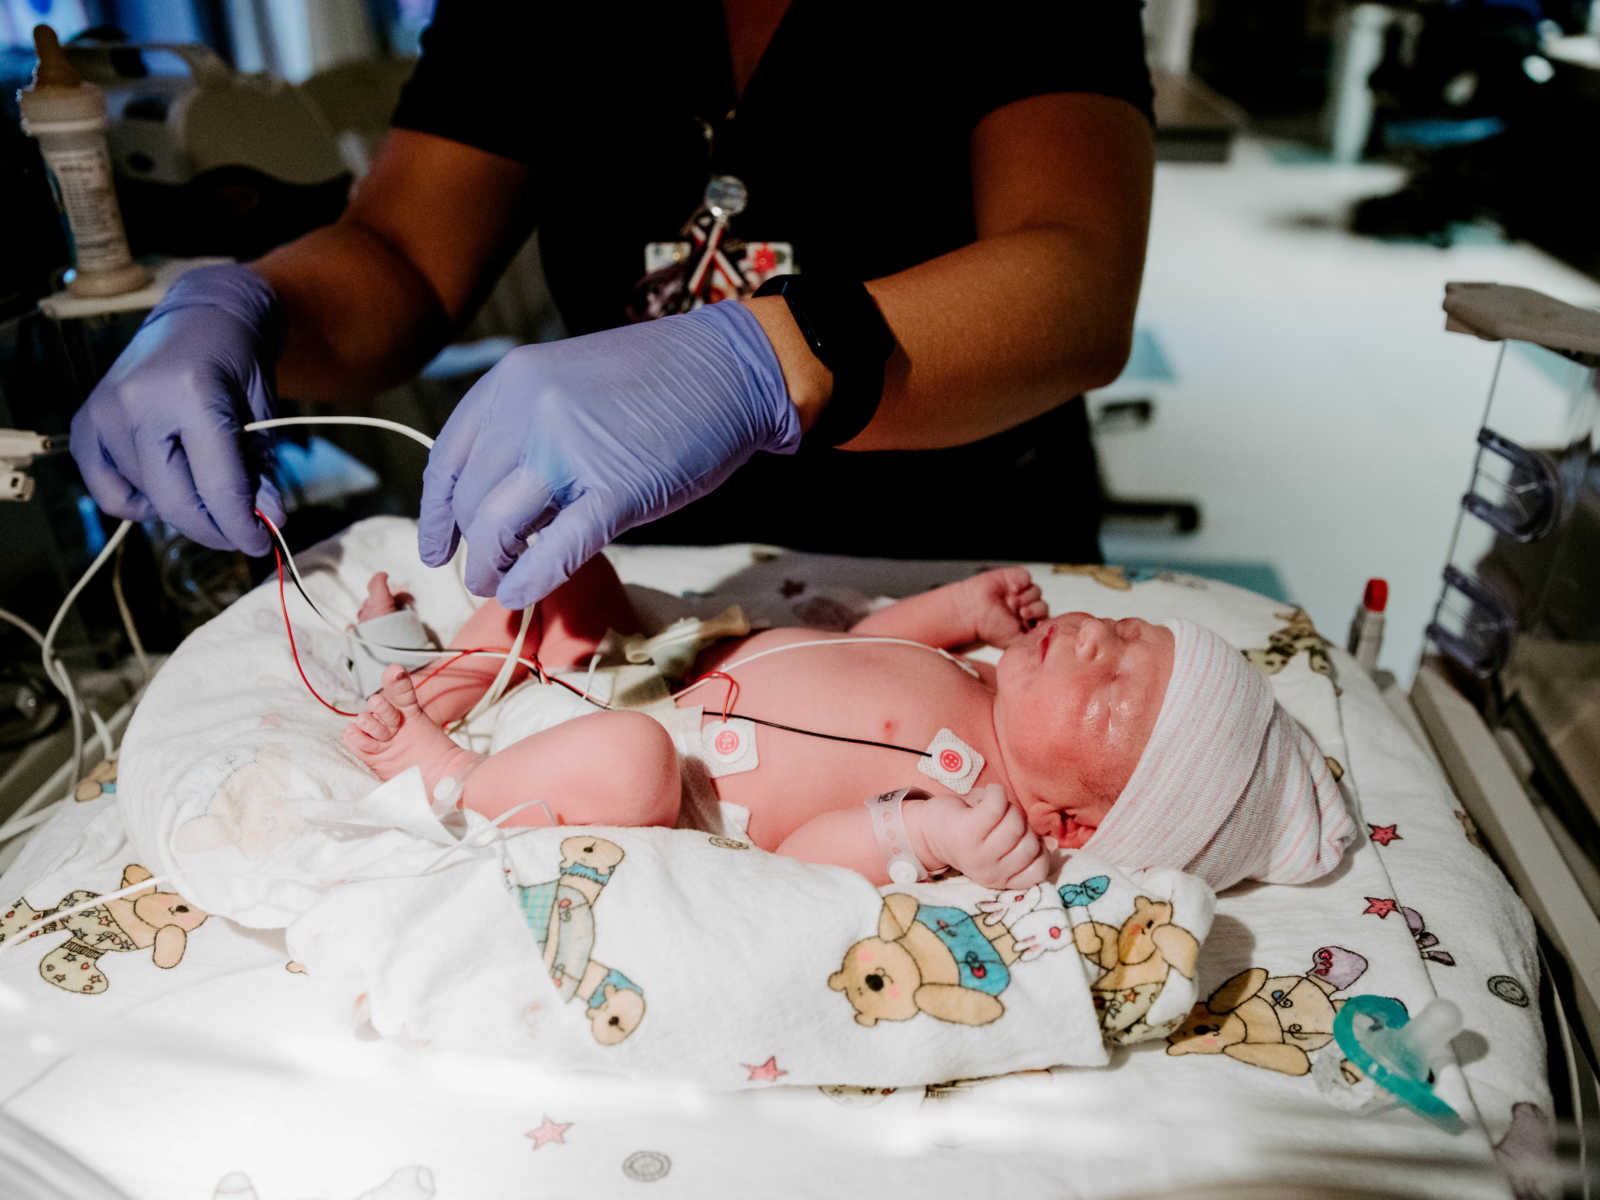 Newborn who was birthed via c-section lays on hospital bed while nurse attaches wires to its body